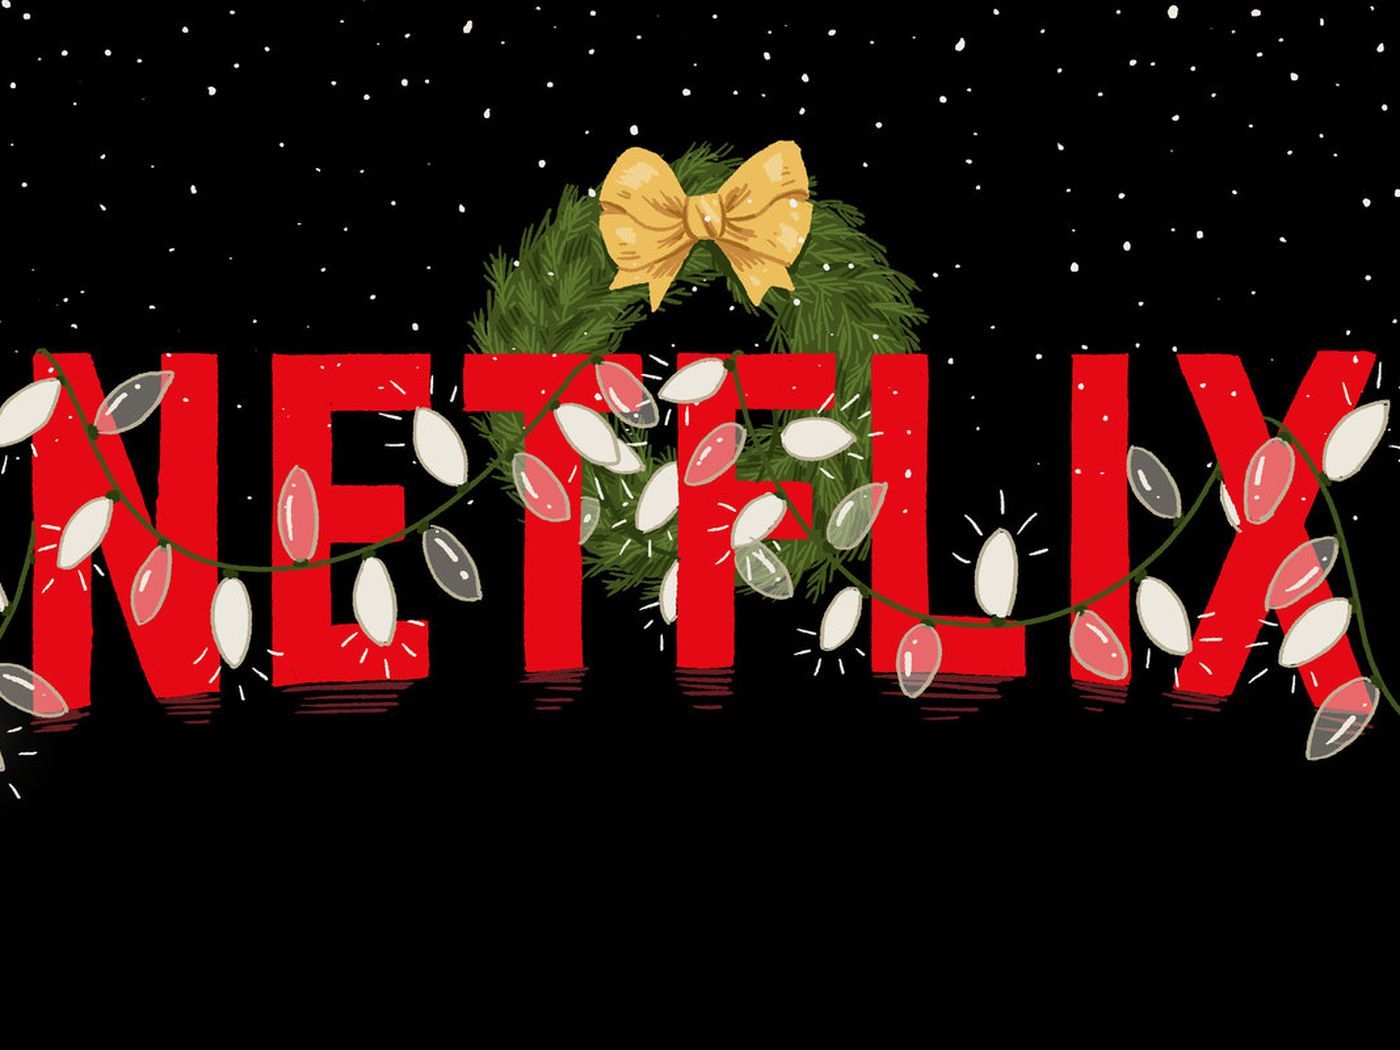 Let It Snow Content: Netflix Has Gone All in on Christmas